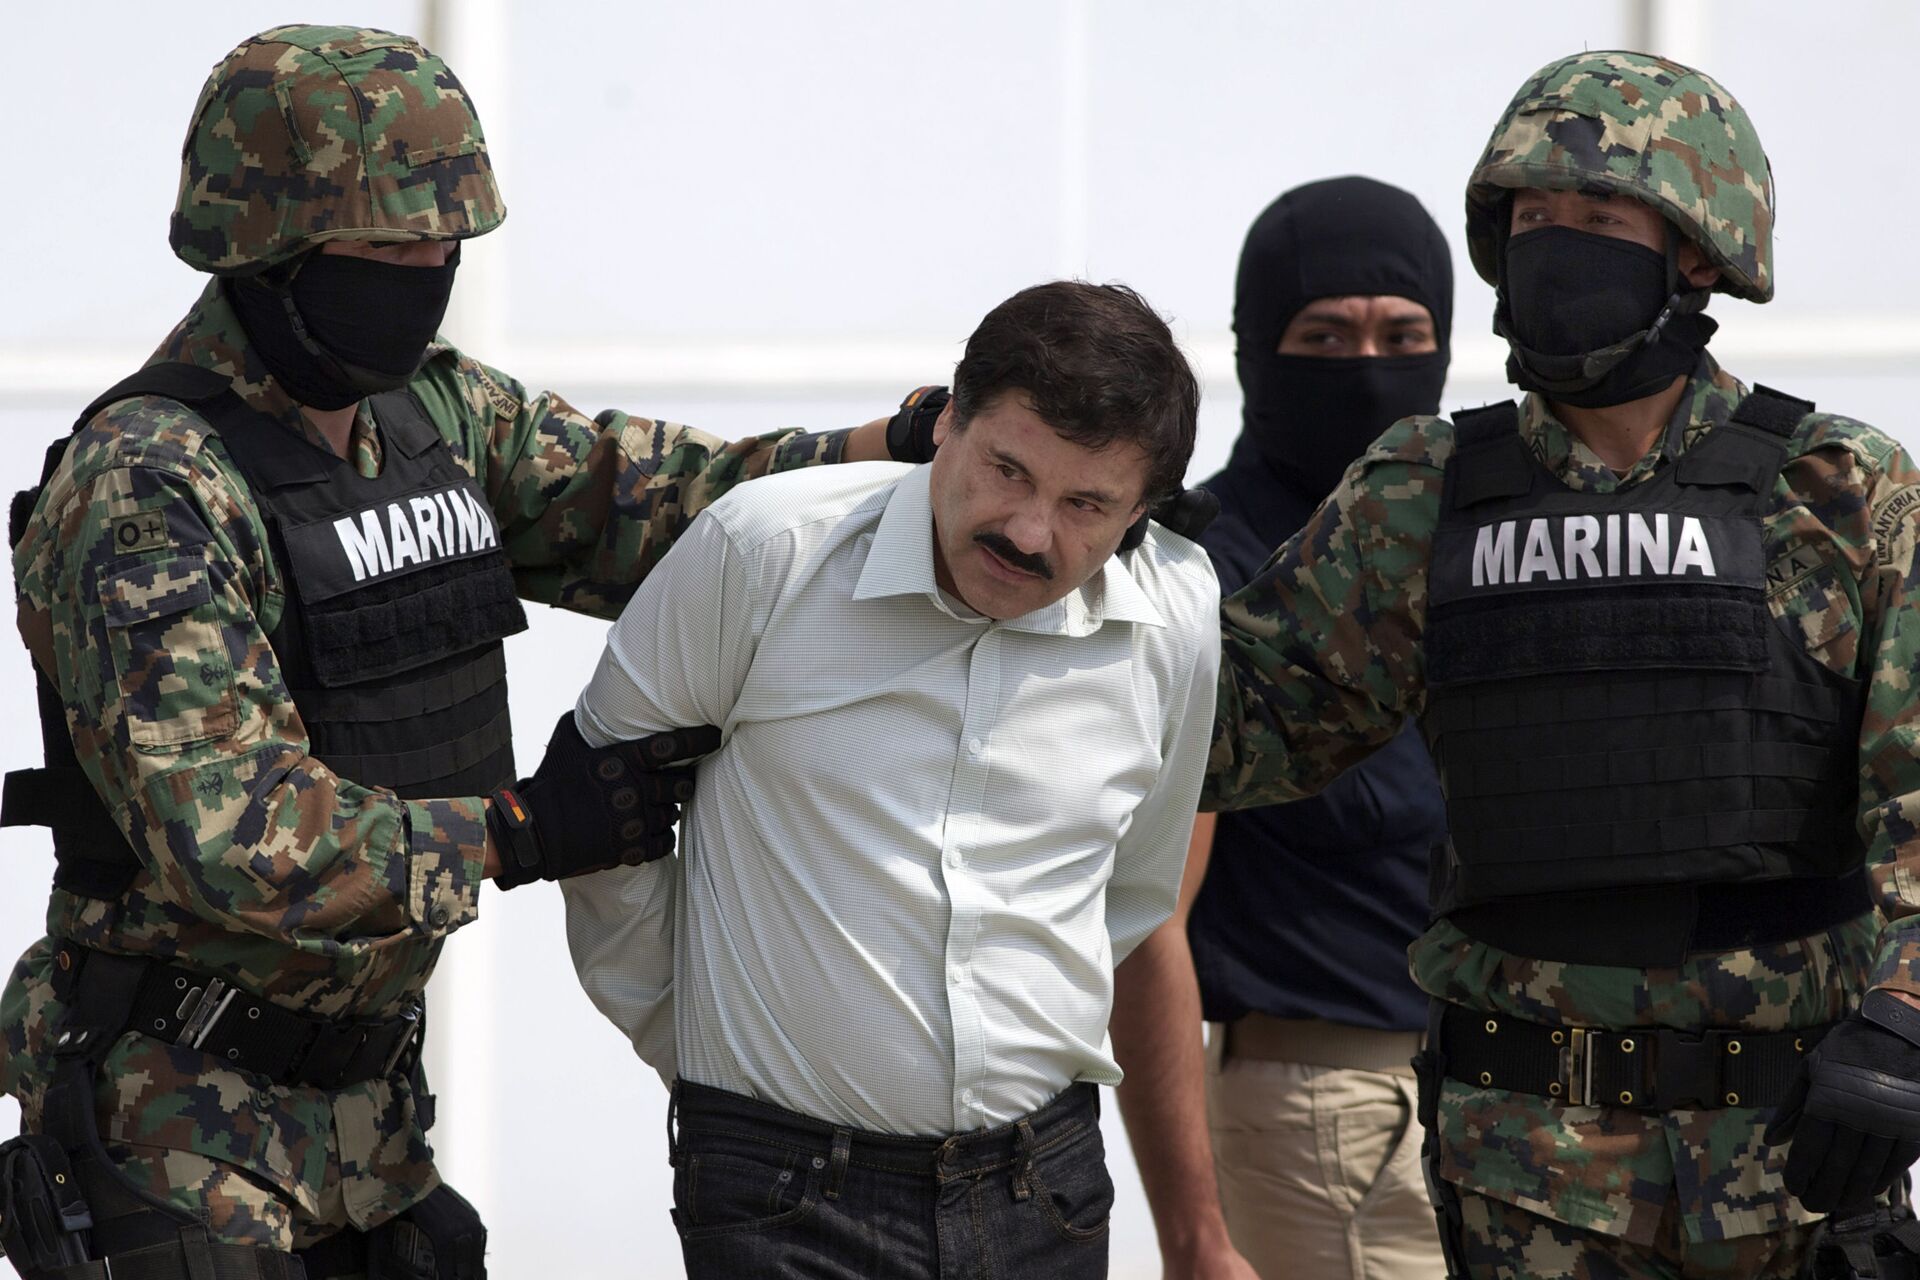 In this Feb. 22, 2014 file photo, Joaquin El Chapo Guzman, center, is escorted to a helicopter in handcuffs by Mexican navy marines at a hanger in Mexico City, after he was captured overnight in the beach resort town of Mazatlan - Sputnik International, 1920, 09.05.2023